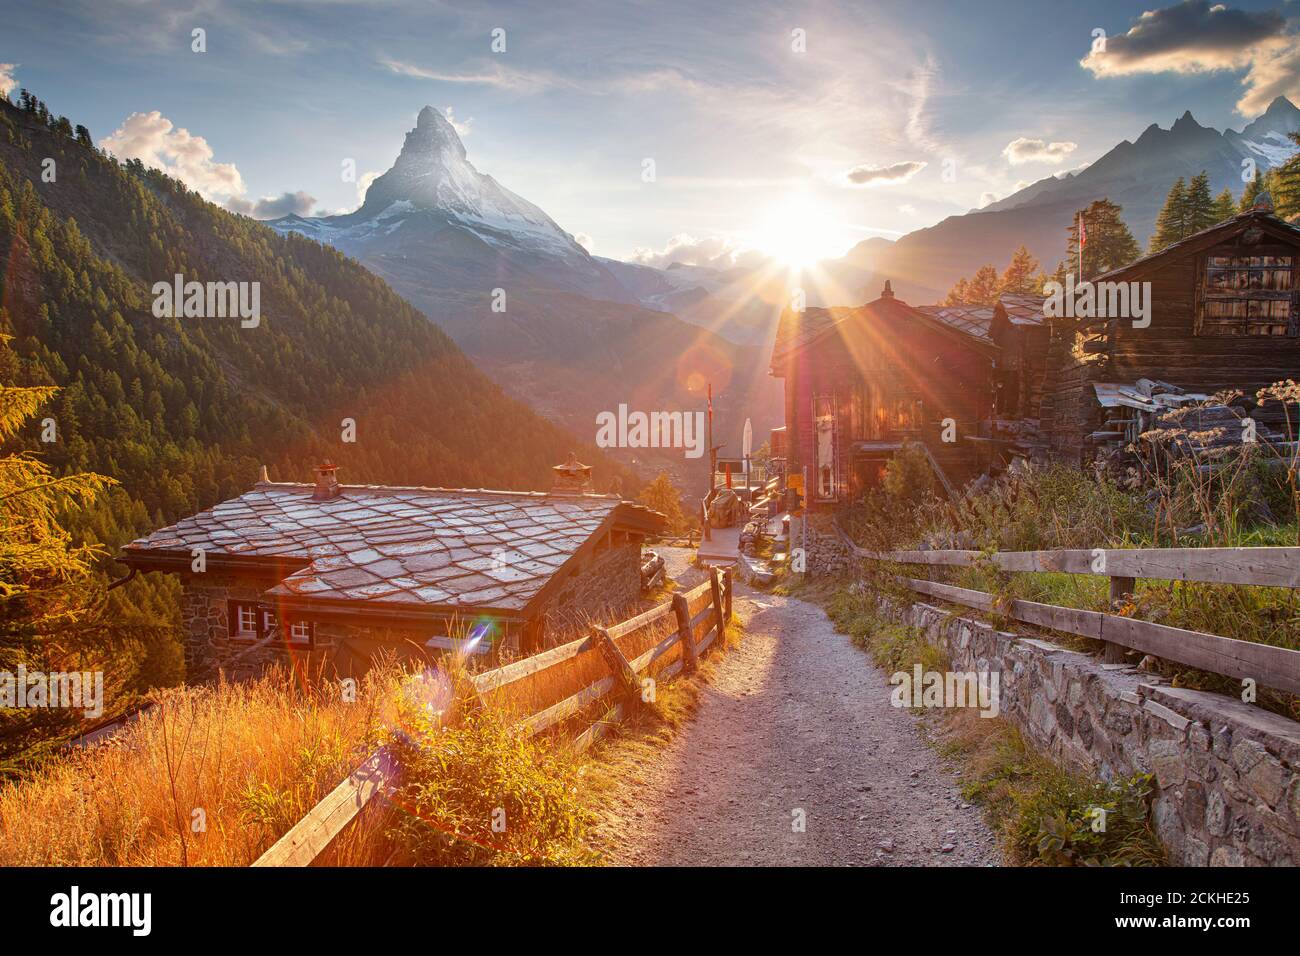 Swiss Alps. Landscape image of Swiss Alps with the Matterhorn during beautiful autumn sunset. Stock Photo